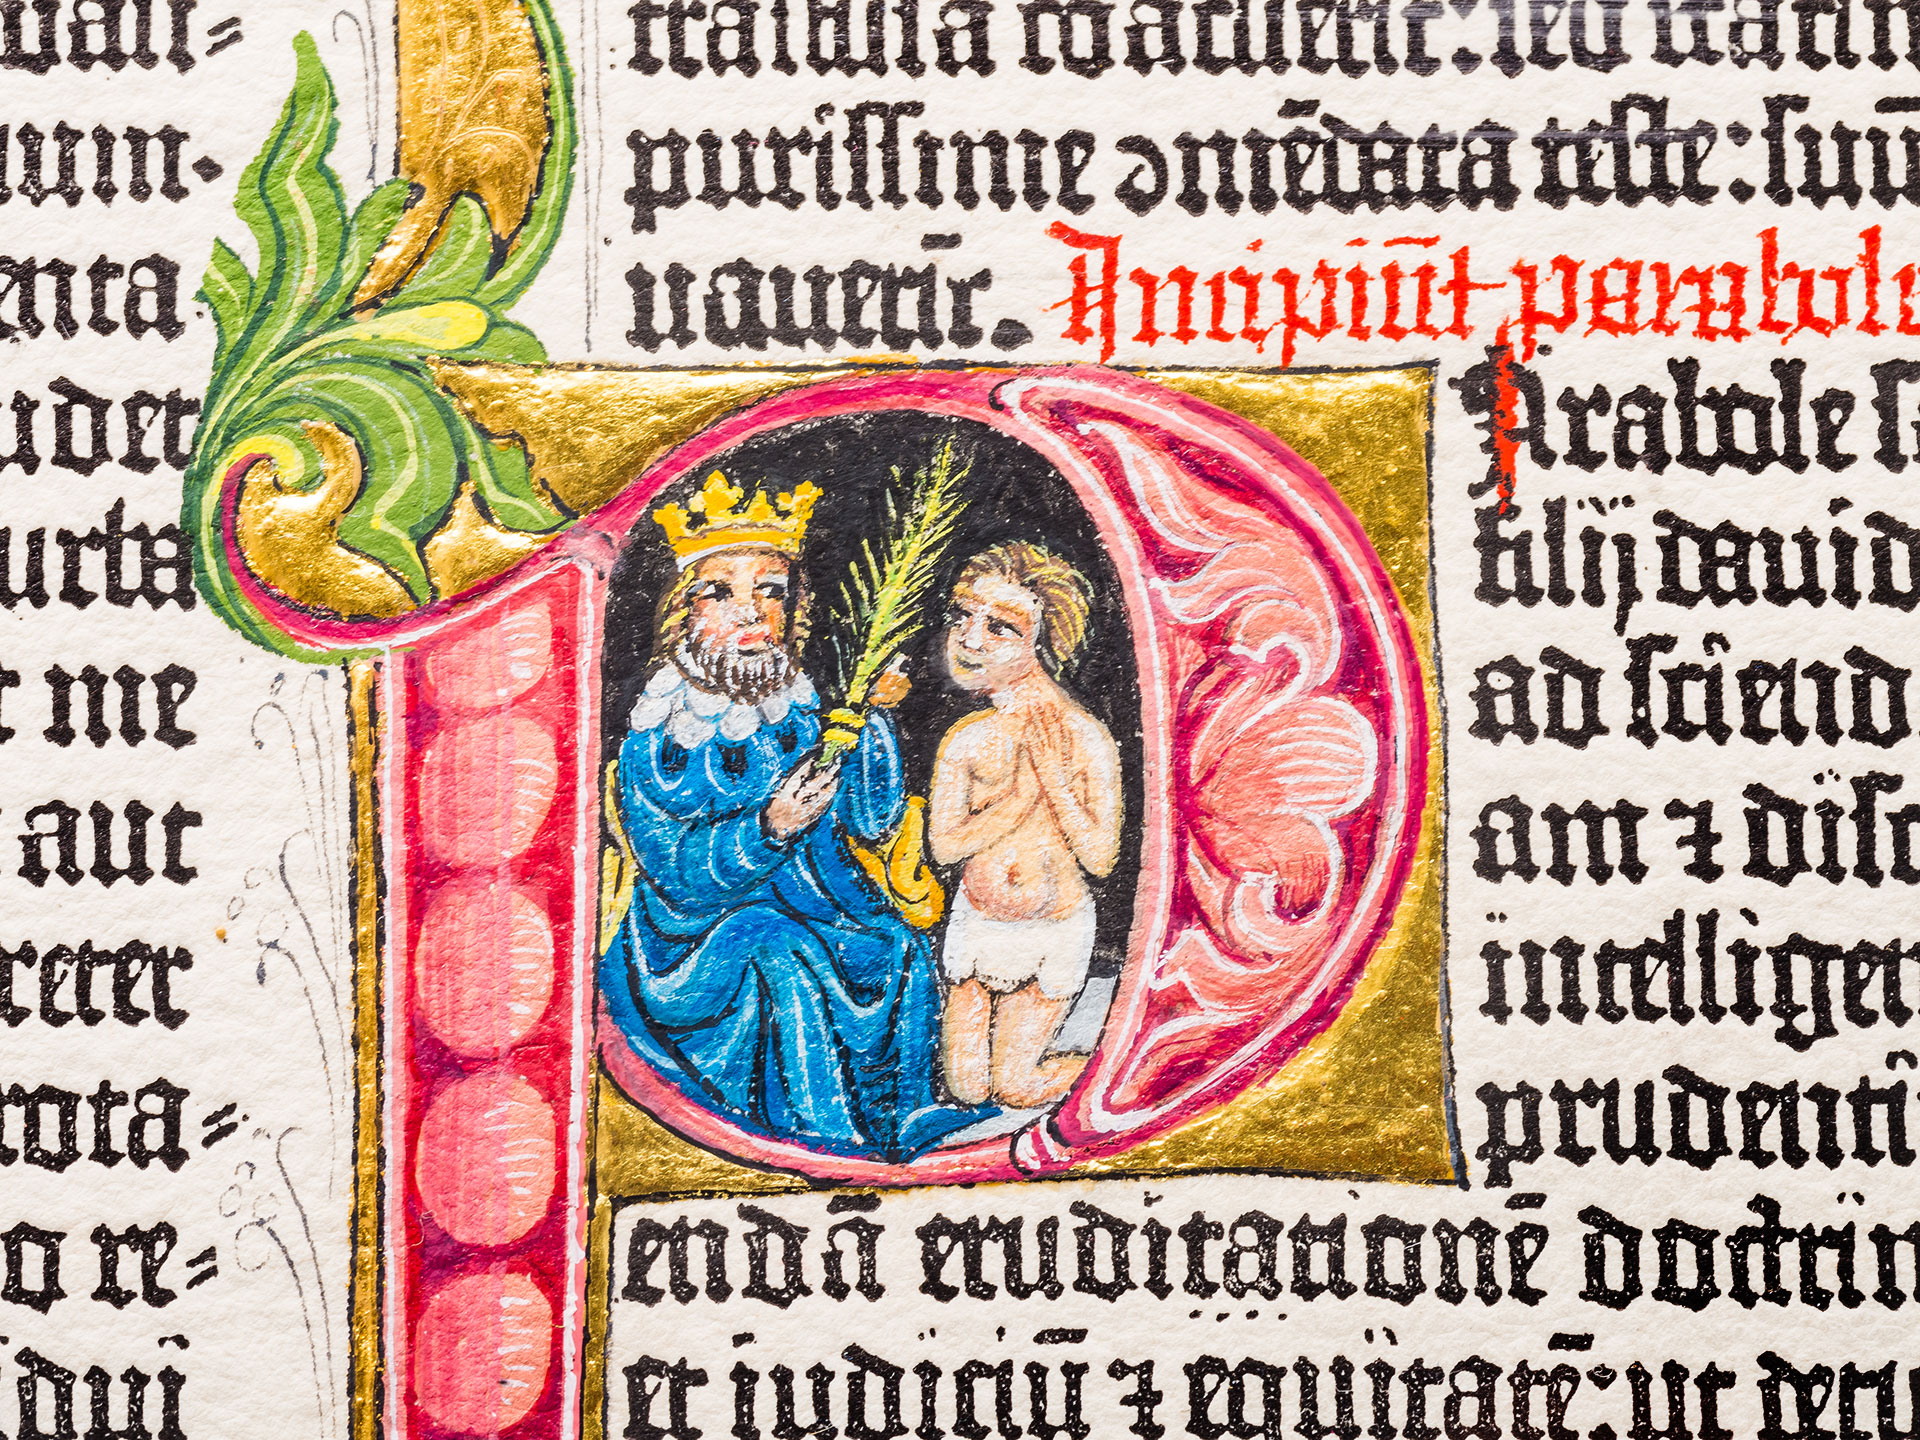 The Book of Proverbs. Ornamental page from the Gutenberg Bible